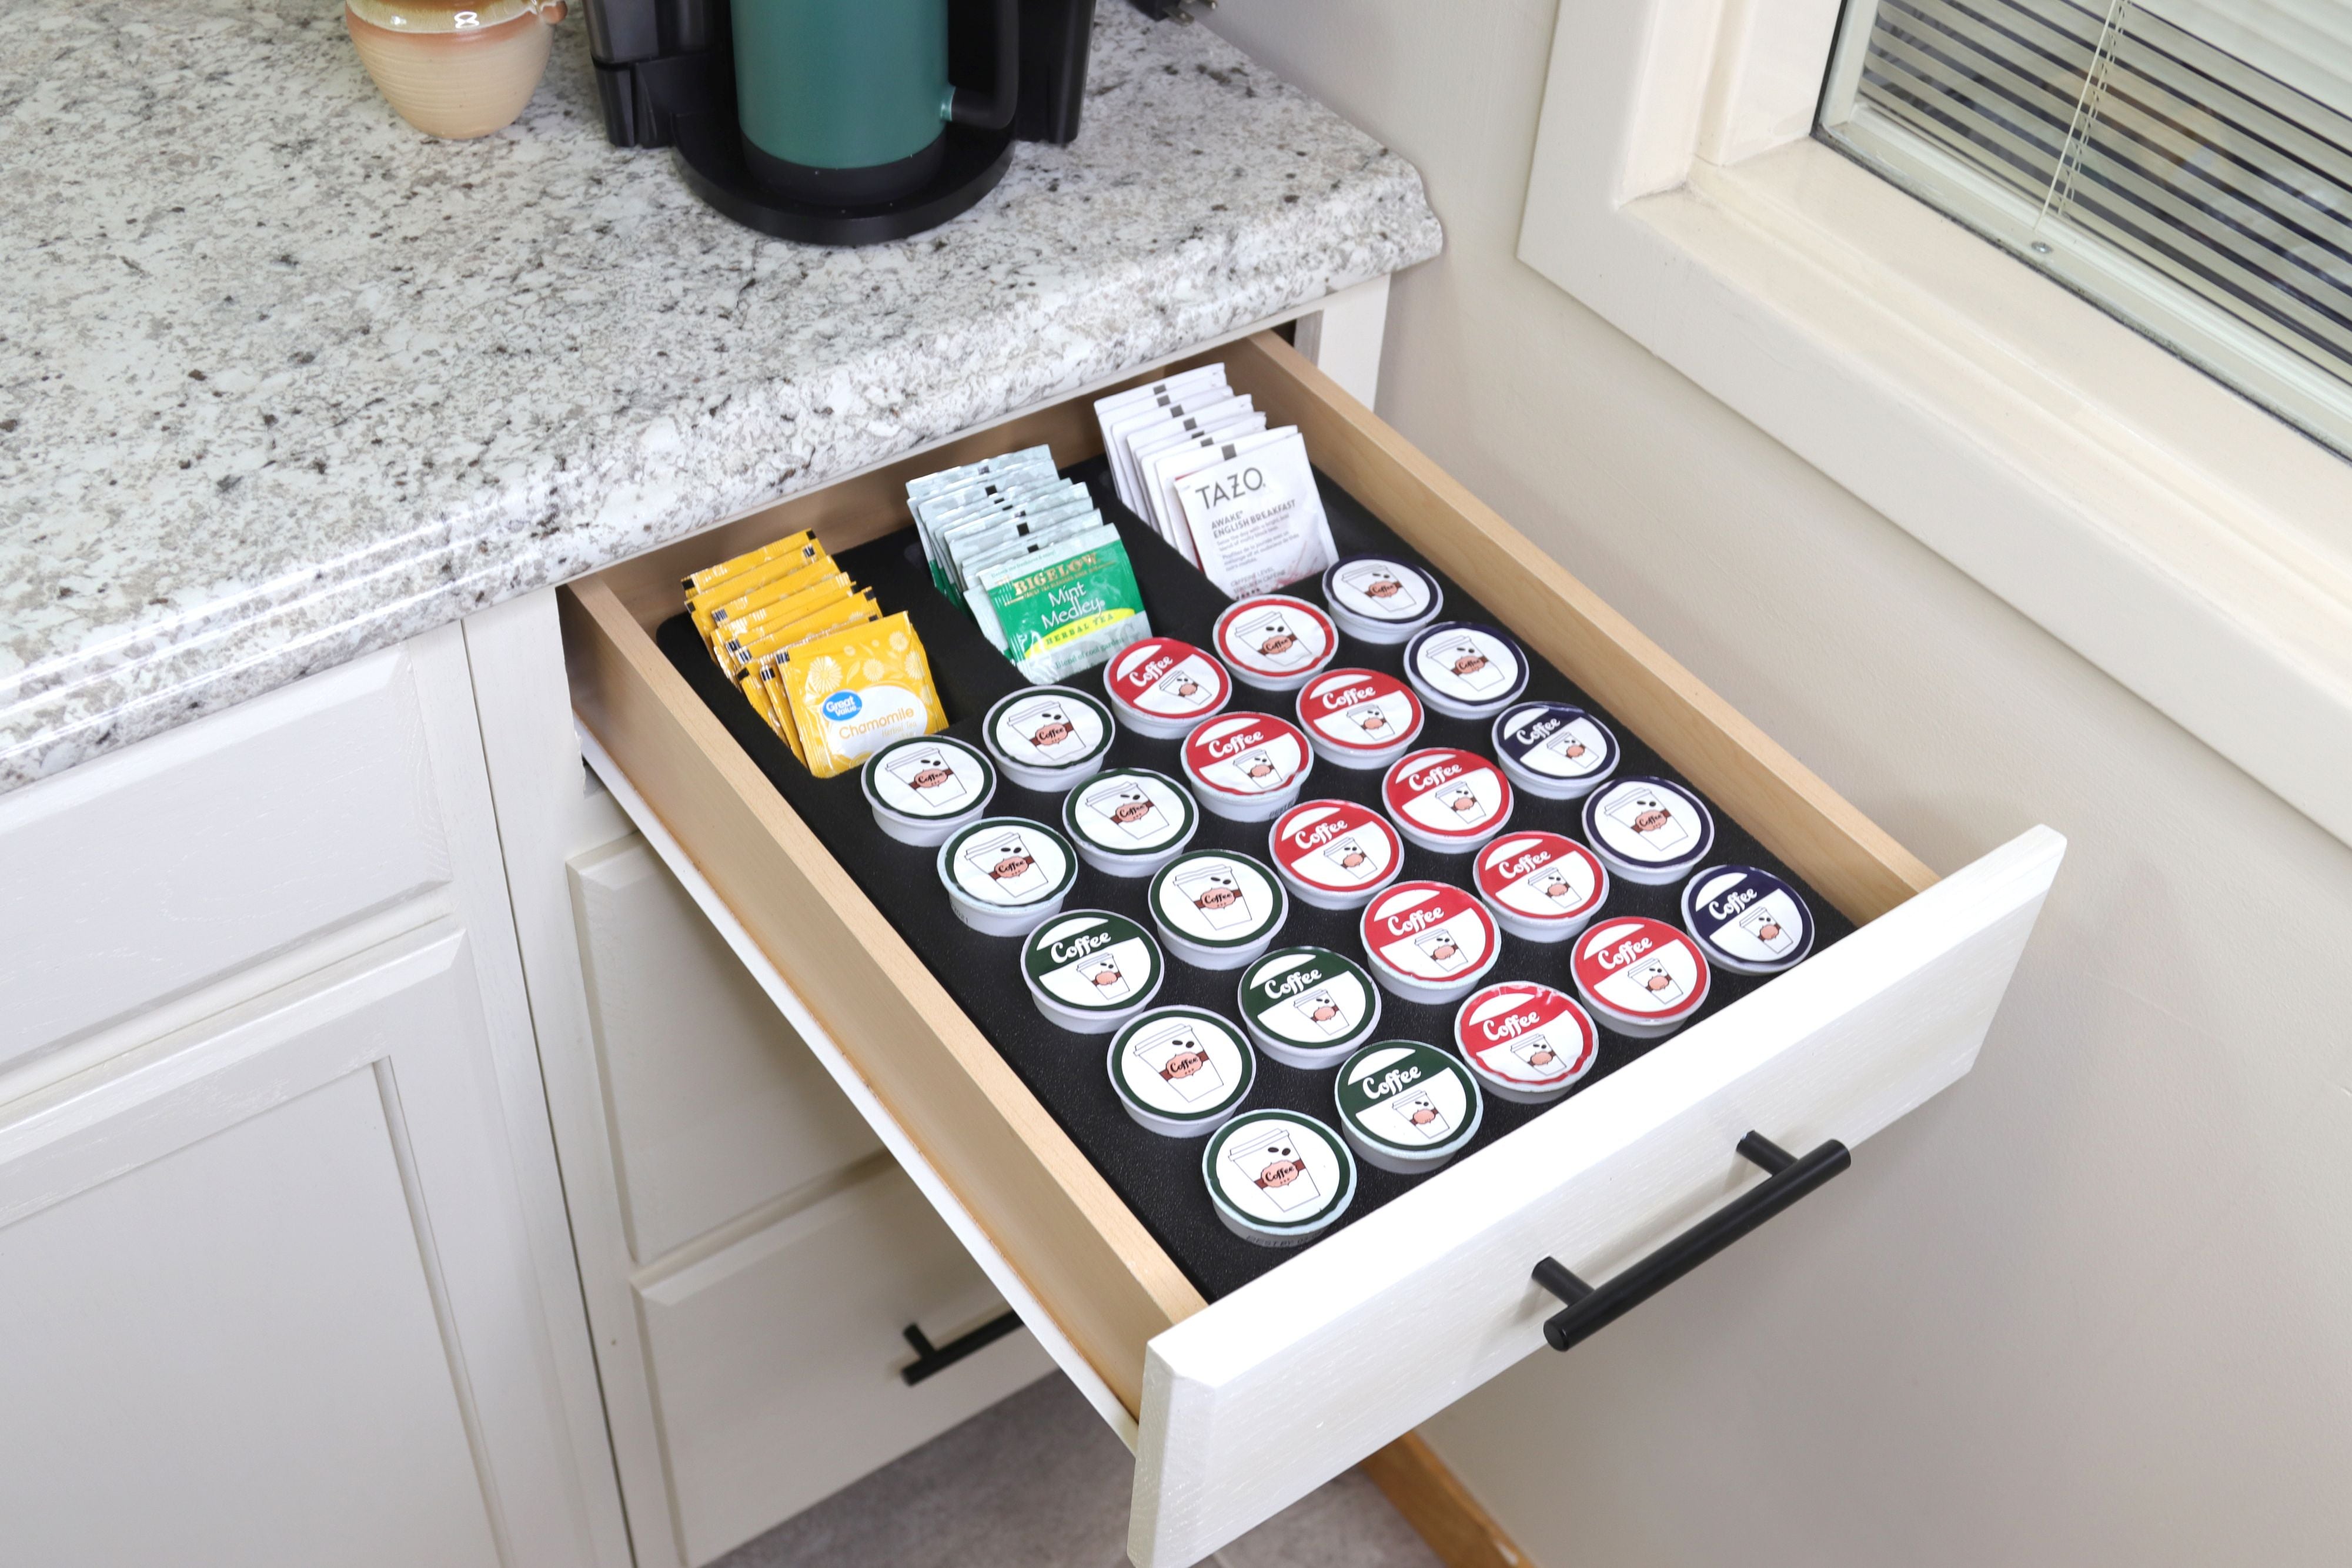 Coffee Pod and Tea Bag Storage Organizer Tray Drawer Insert for Kitchen Home Office 11.9 x 15.9 Inches Holds 25 Compatible with Keurig K-Cup